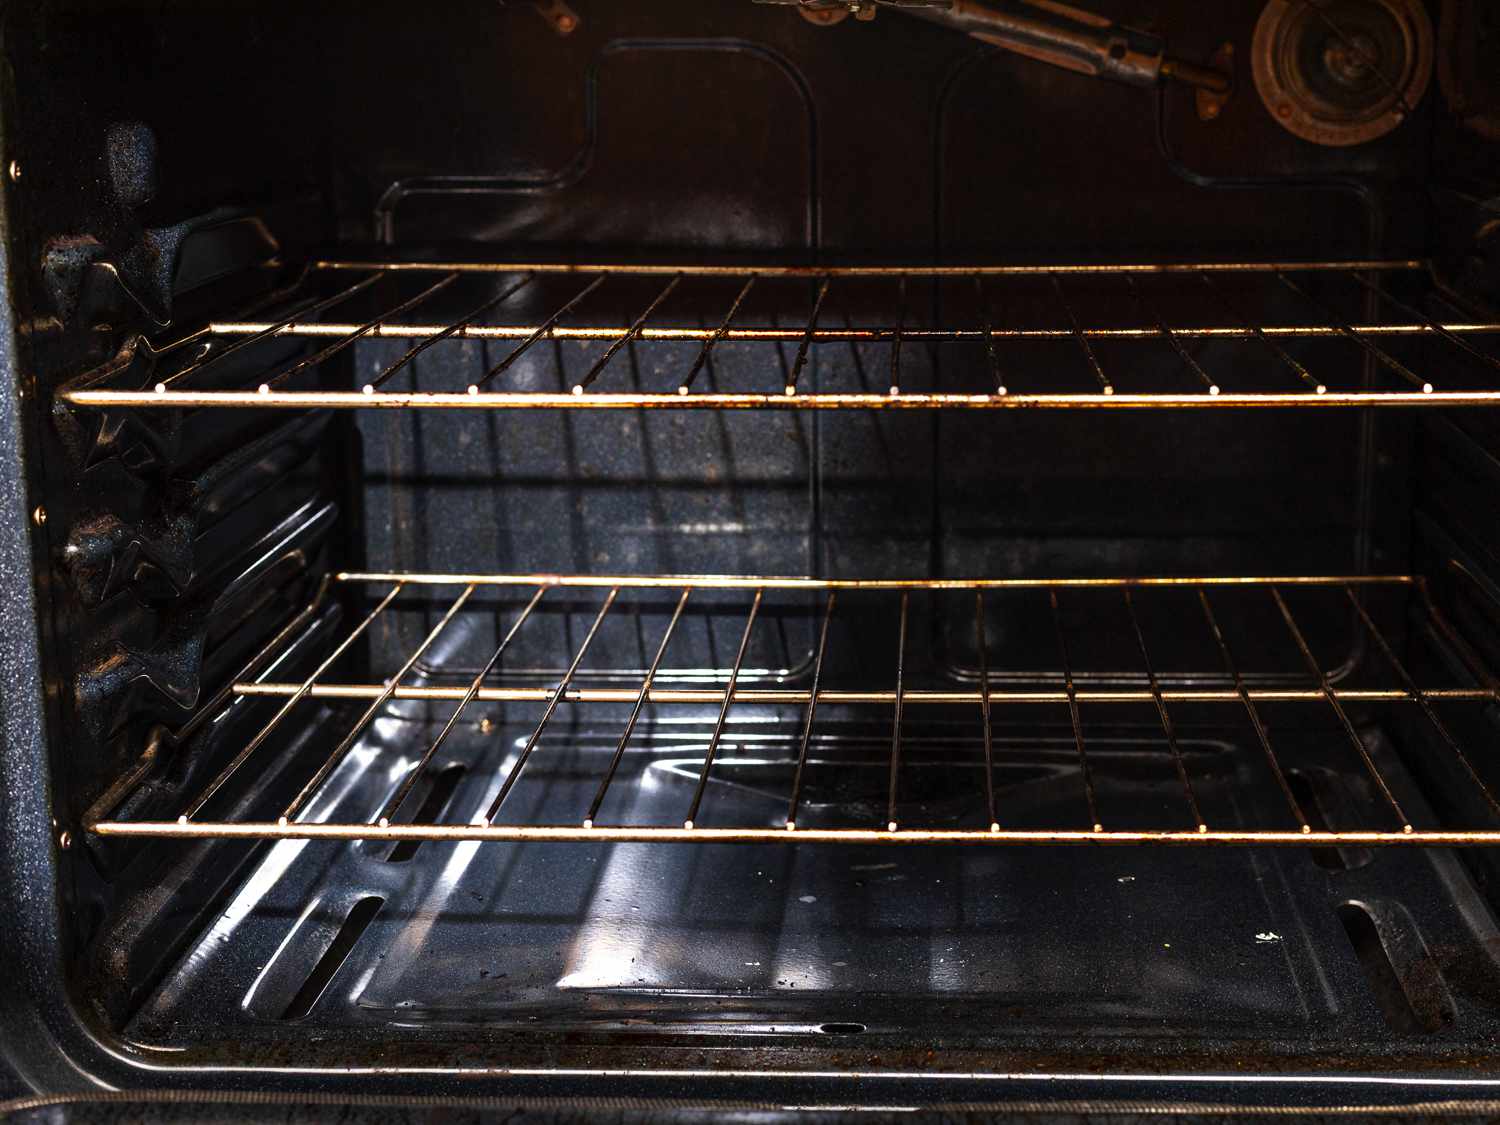 Rack inside of oven, set to lower position (without anything on it).